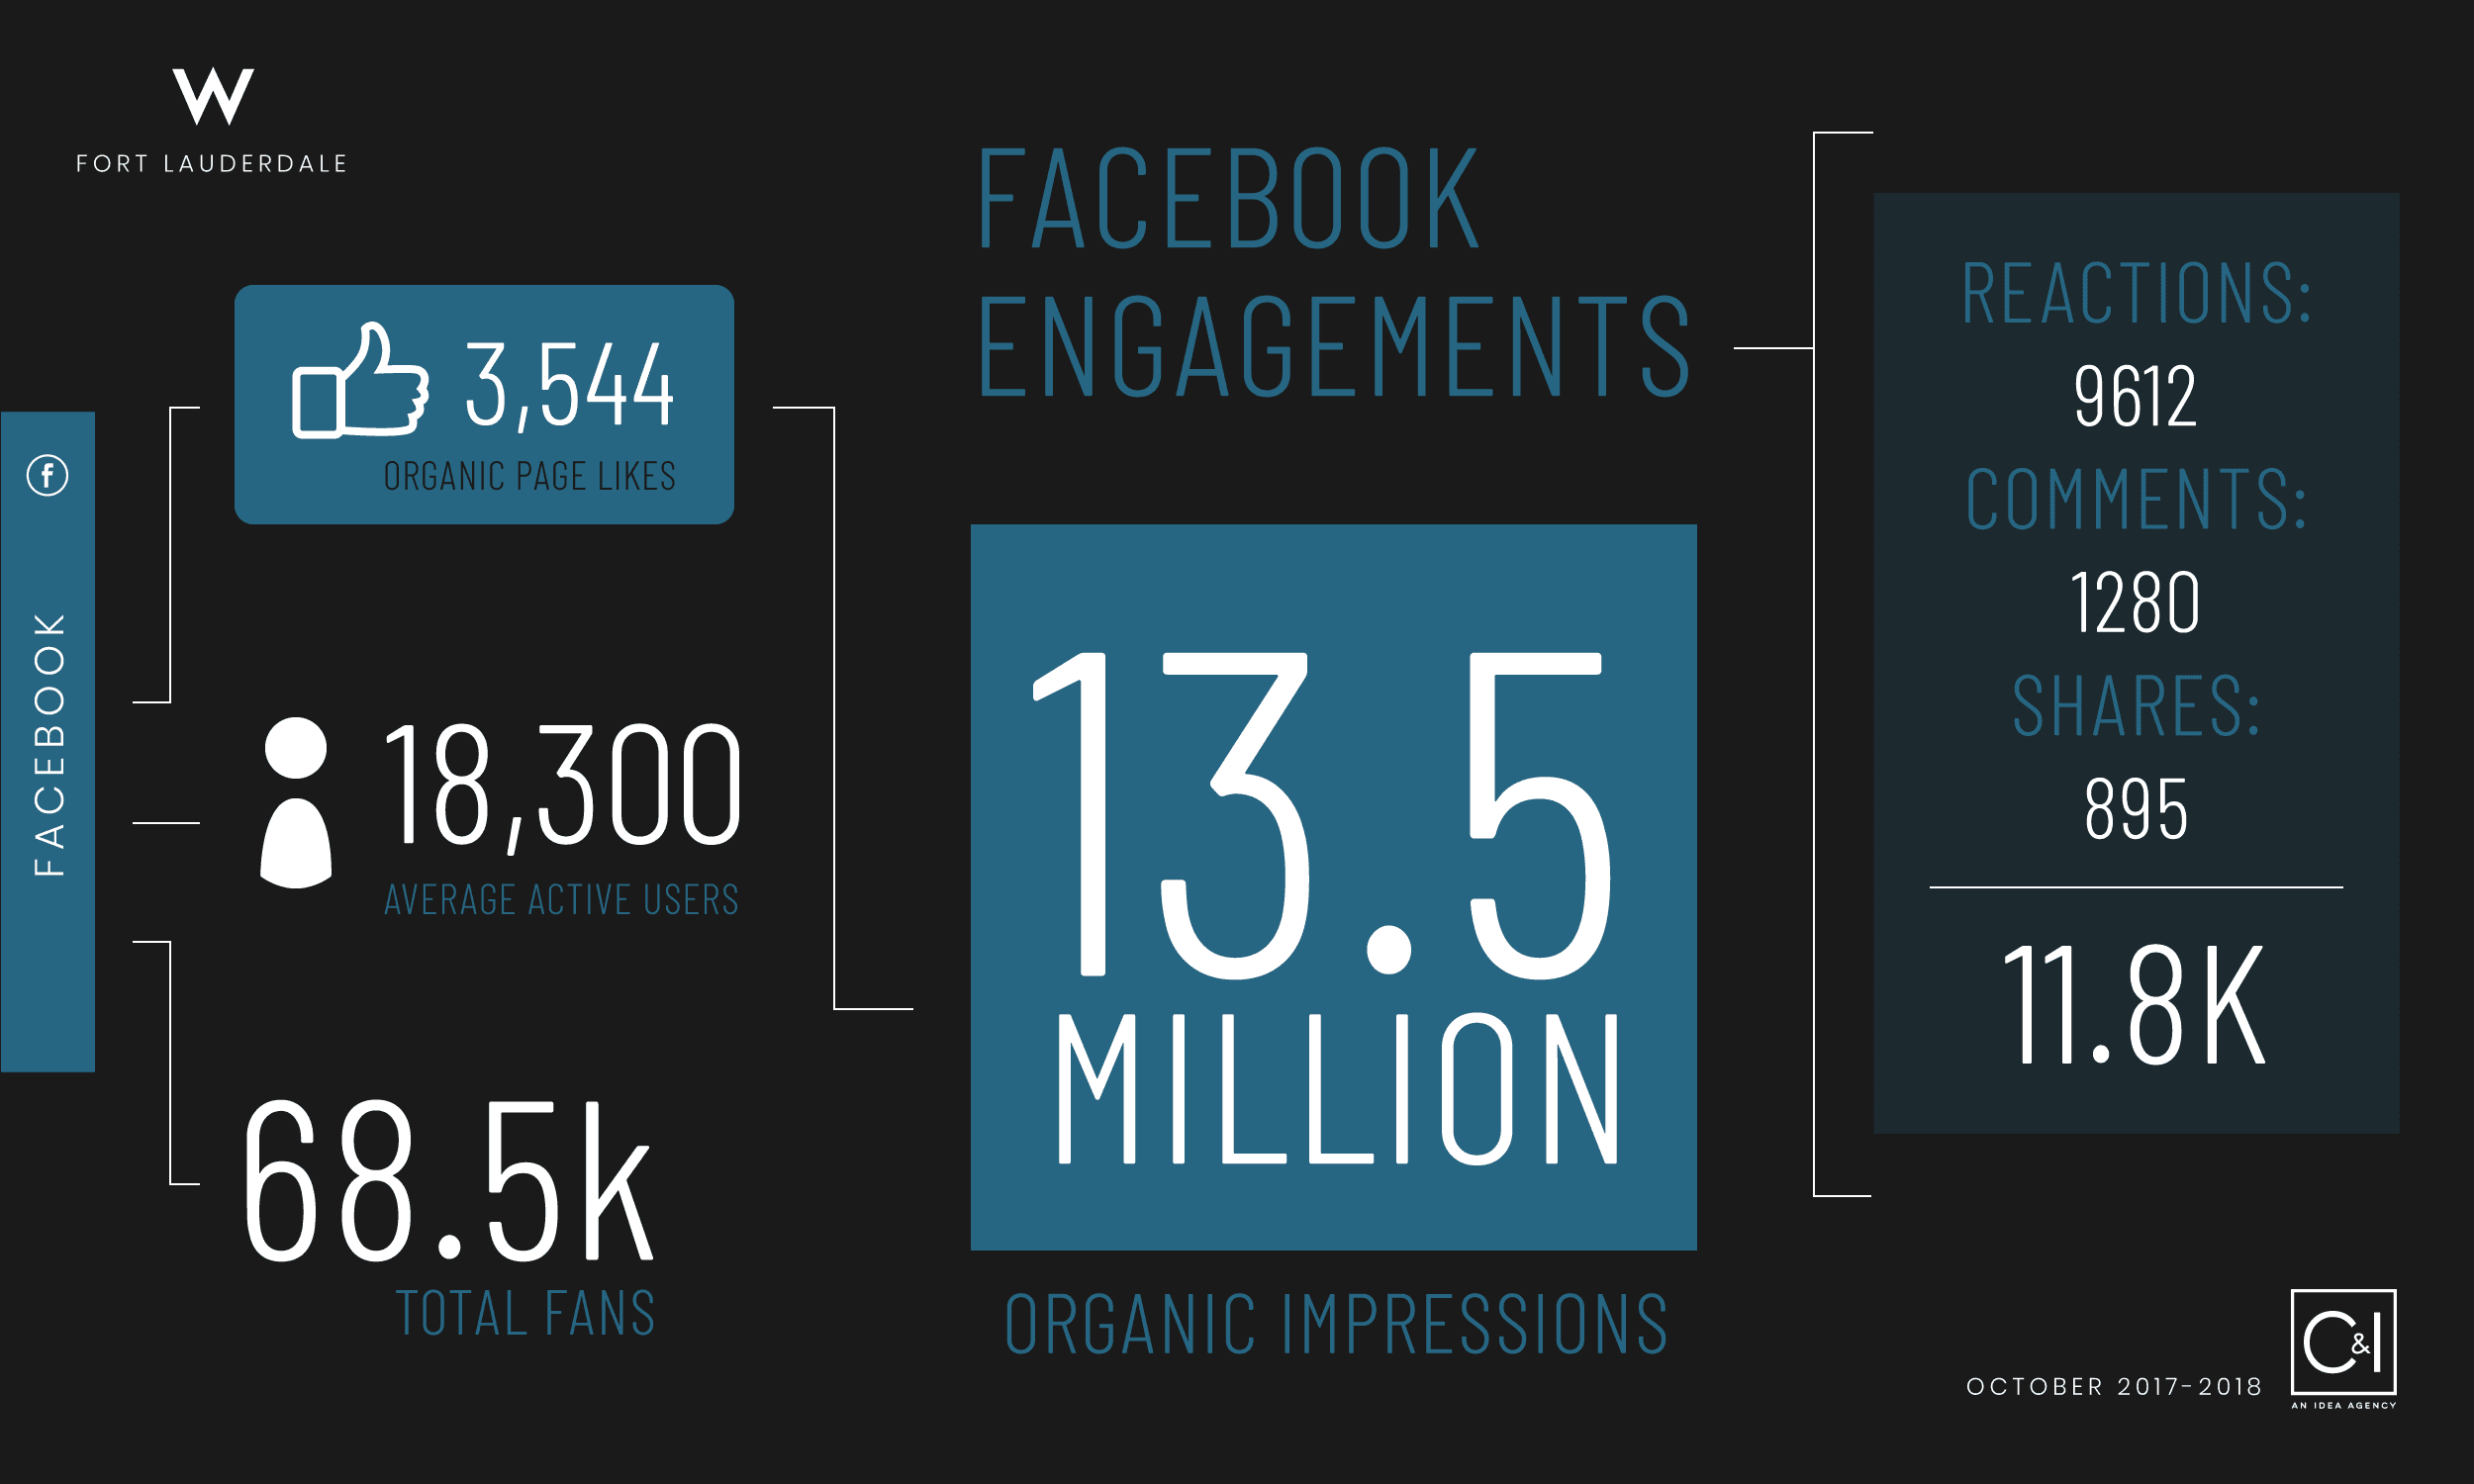 Facebook Engagements for October 2017 through 2018 for W Fort Lauderdale